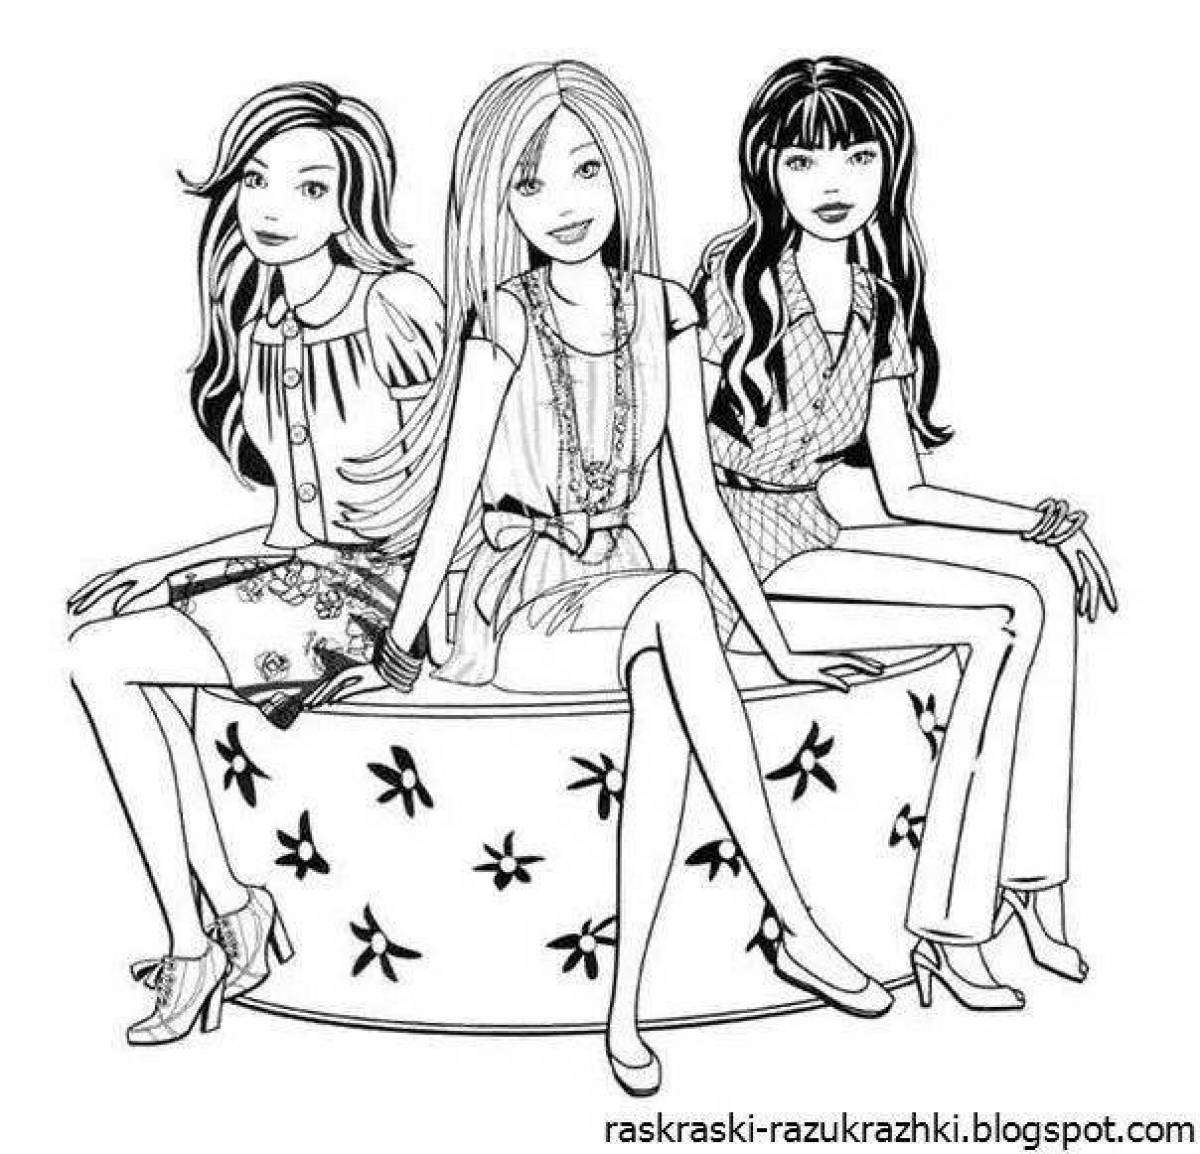 Fun girls from lp coloring book